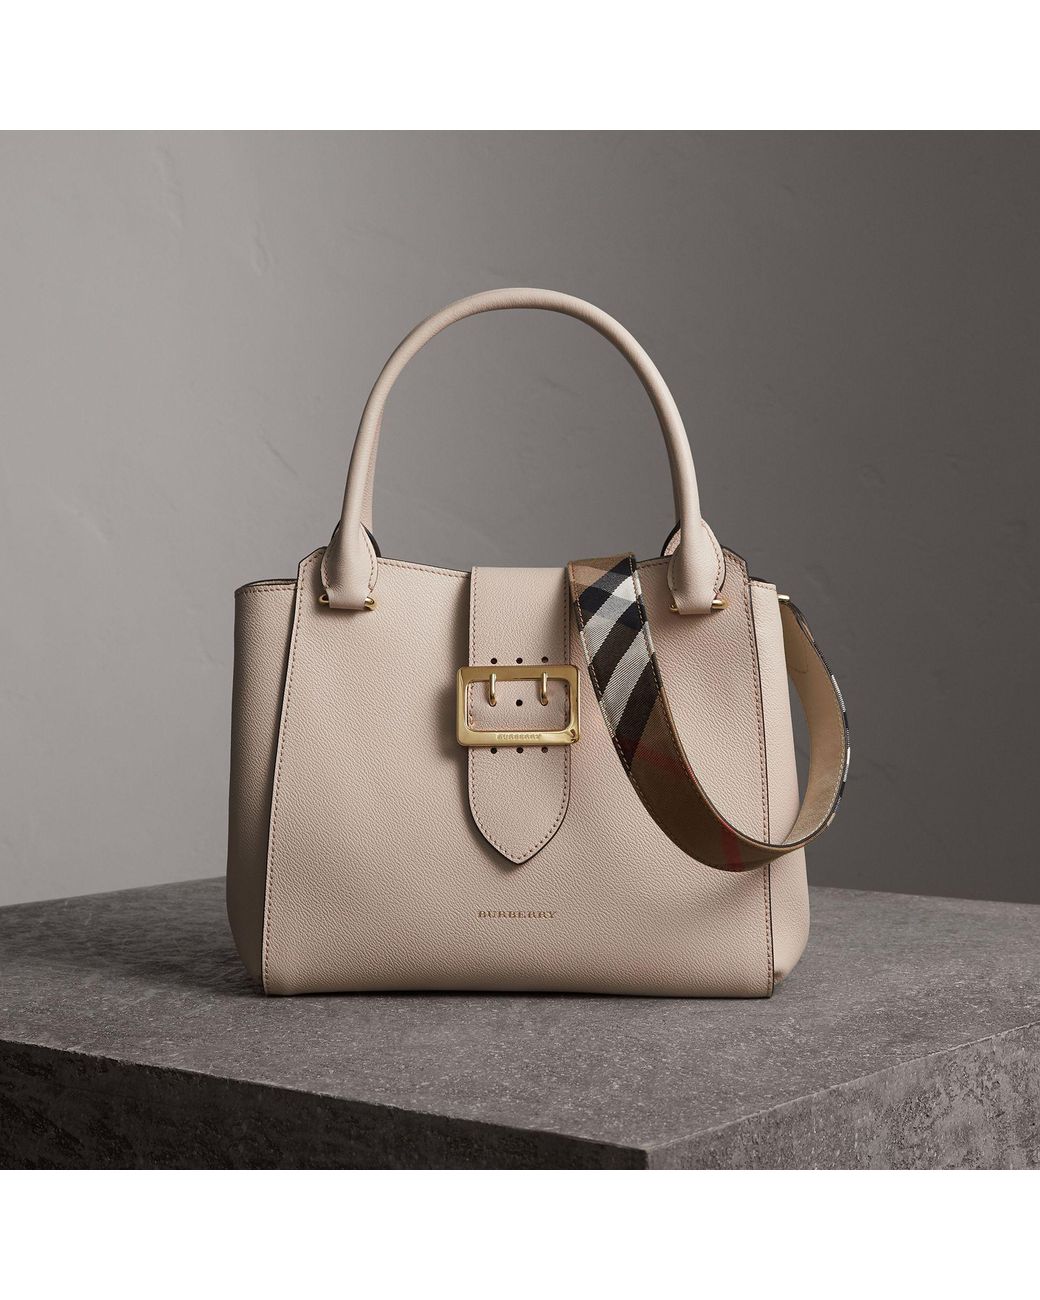 Burberry Gold Grained Leather Medium Buckle Tote Bag